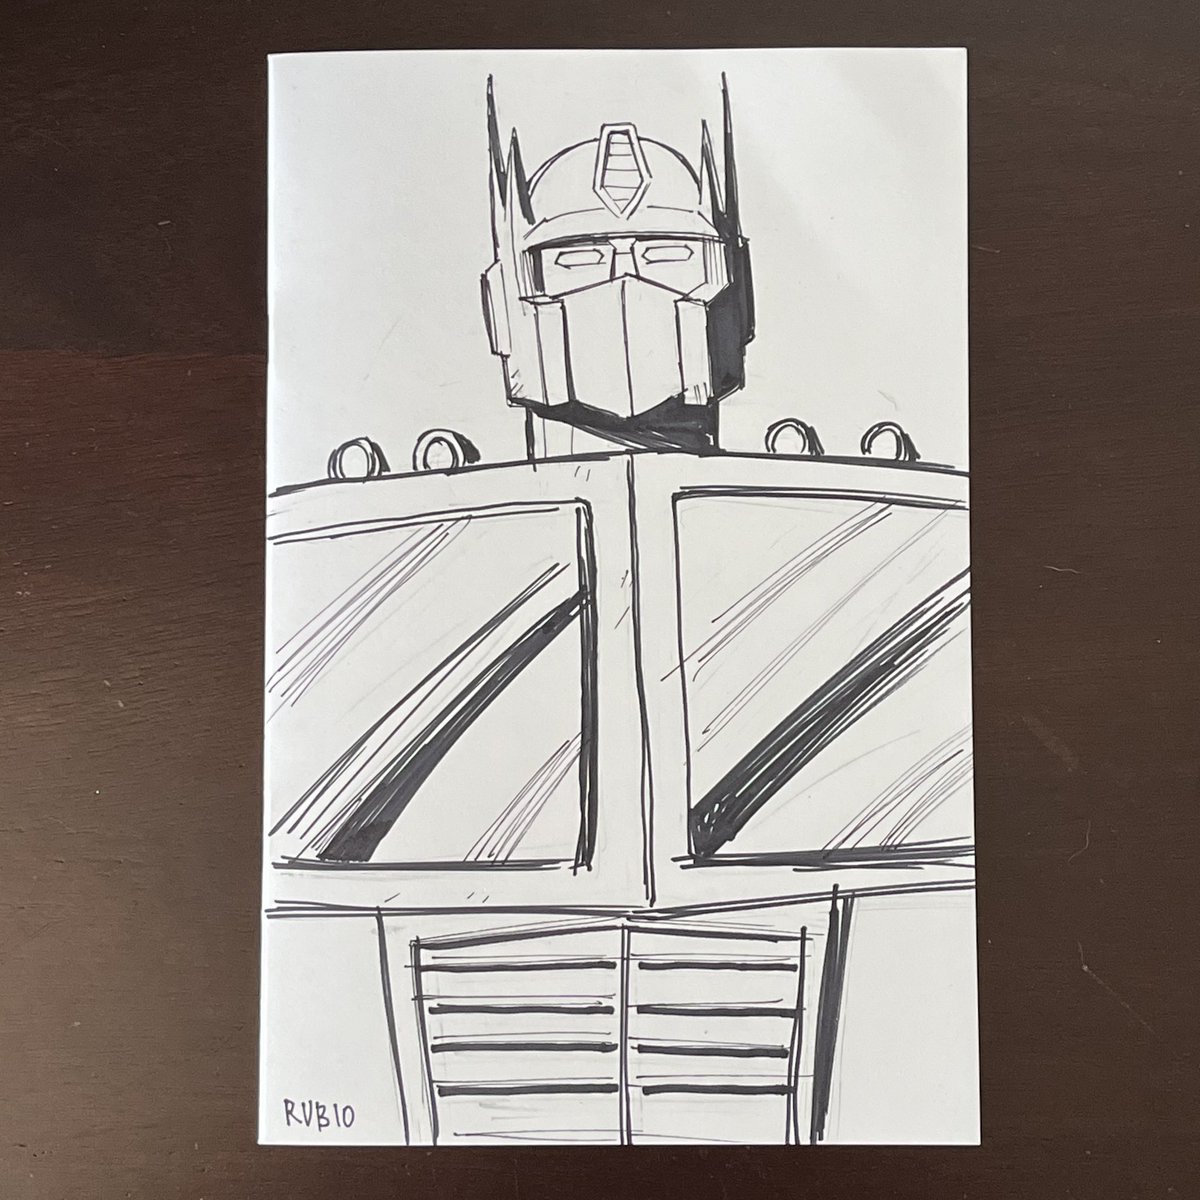 Hey, do you want a chance to win #OriginalArtwork of the #G1Transformers #OptimusPrime by the #HeadOfStory of #TransformersOne? Well, if you’re in the #BayArea in #Concord THIS SATURDAY at #FlyingColorsComics for the #FreeComicBookDay event, then you’re in luck! See you there!